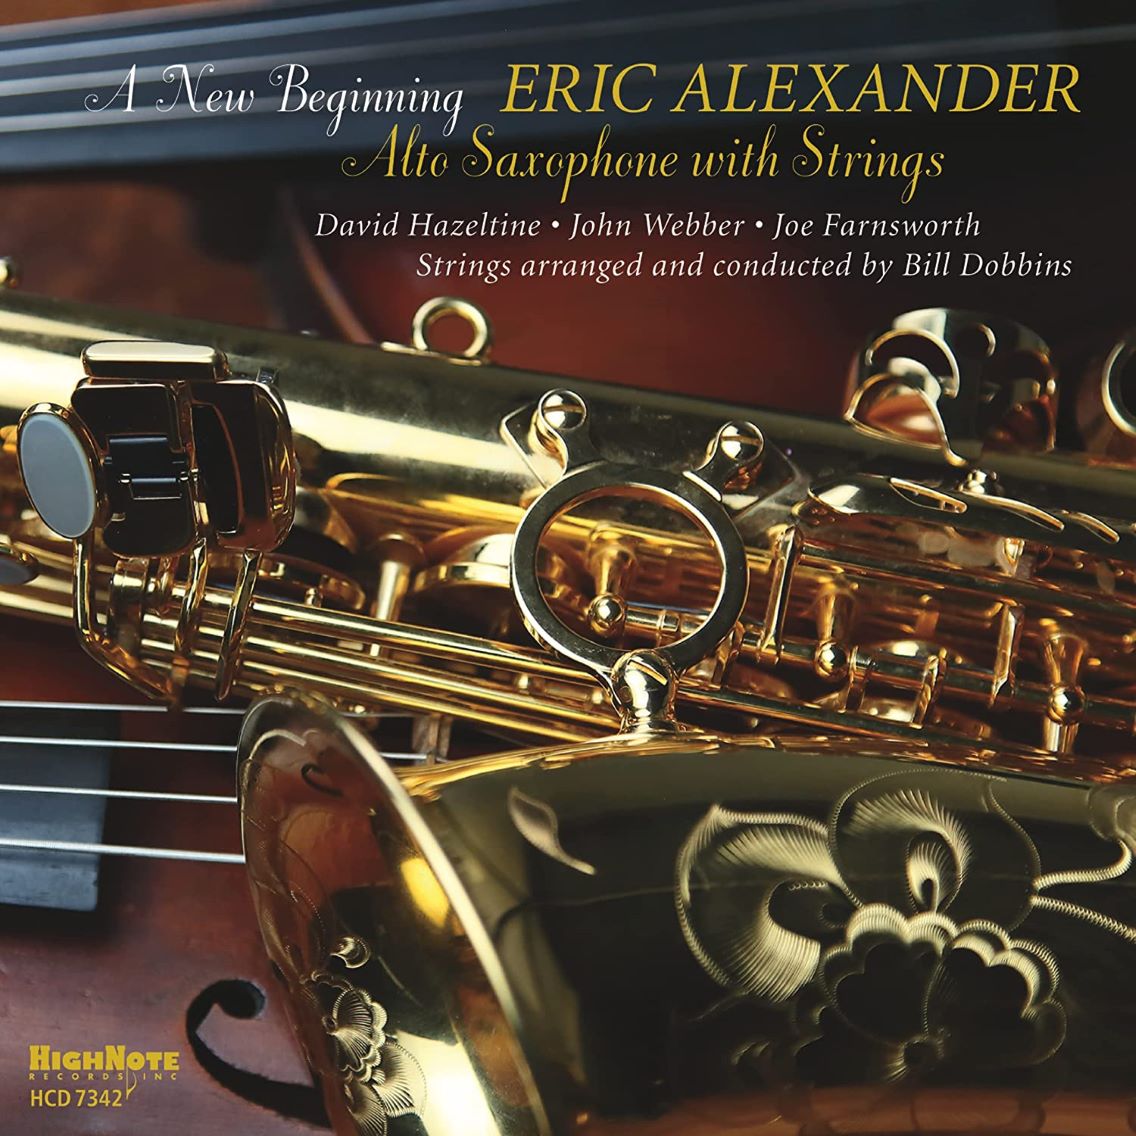 Eric Alexander / A New Beginning - Alto Saxophone with Strings